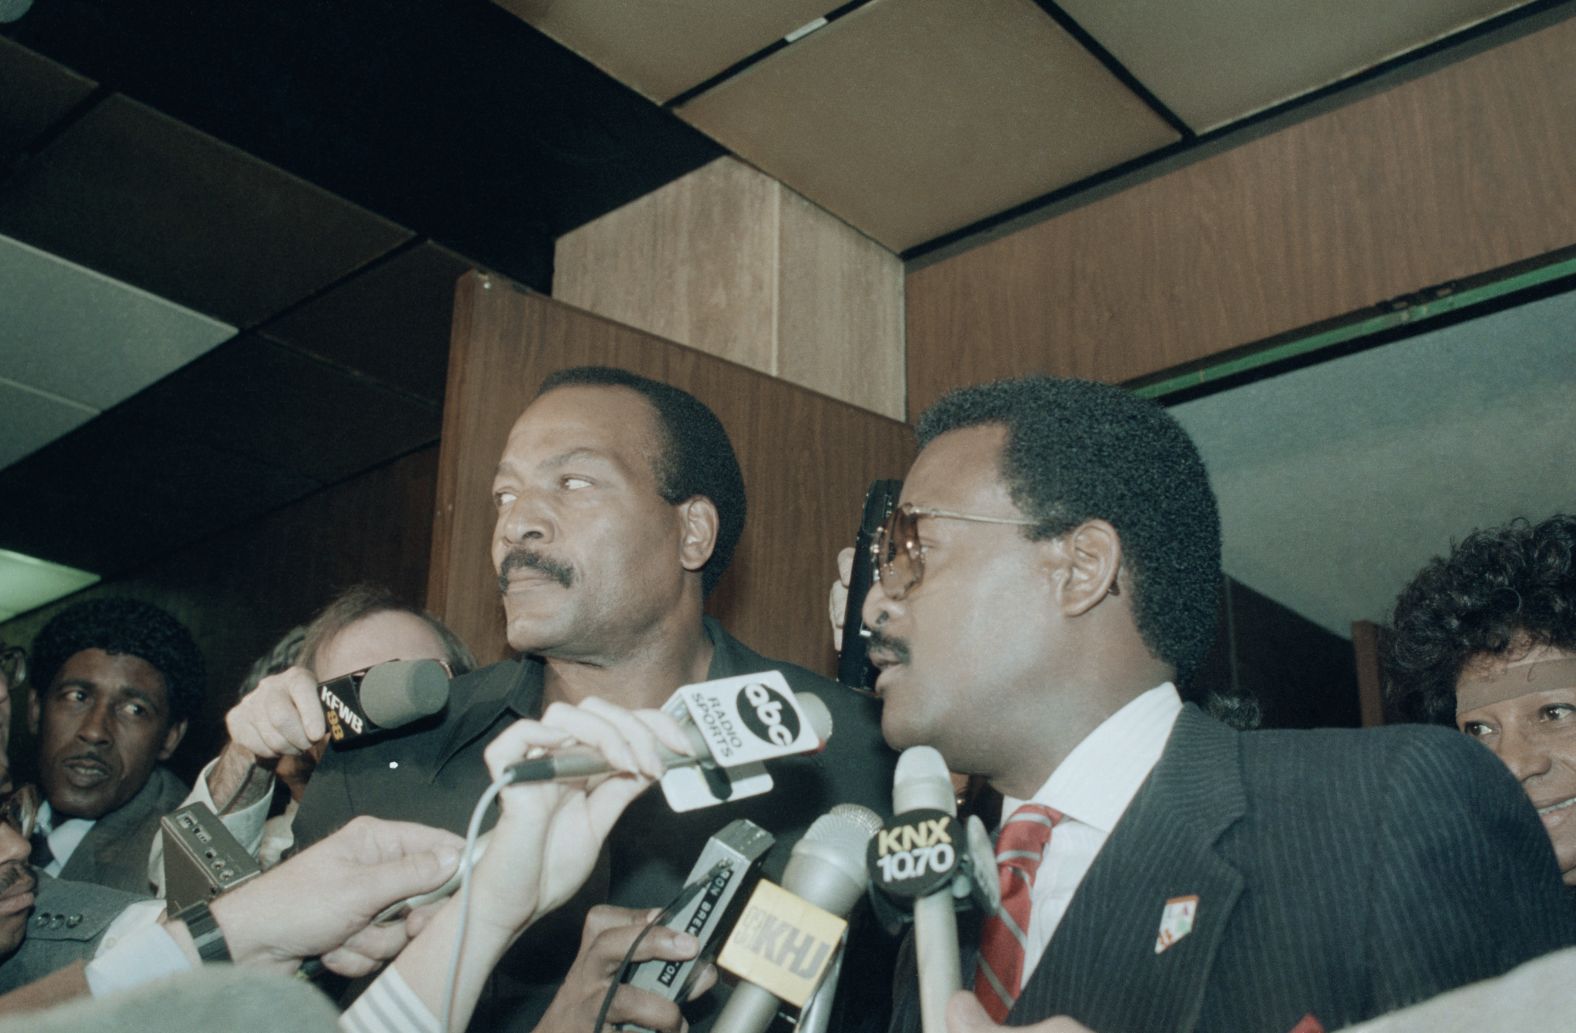 Brown and attorney Johnnie Cochran enter a court in Los Angeles in 1985. That year, Brown was charged with raping and assaulting a 33-year-old woman in his home. The judge later dismissed the charges based on inconsistent testimony. During the 1960s, Brown was charged on two separate occasions with assaulting women: a jury found him not guilty in one case, and the charge was dismissed in the other after the woman refused to name him as her assailant. In 1999, following a domestic disturbance with his wife, Monique, Brown was arrested and charged with making terrorist threats toward her. In the 911 tape, she accused Brown of threatening to kill her, a claim she later recanted. A jury found Brown guilty of vandalism for smashing his wife's car with a shovel.